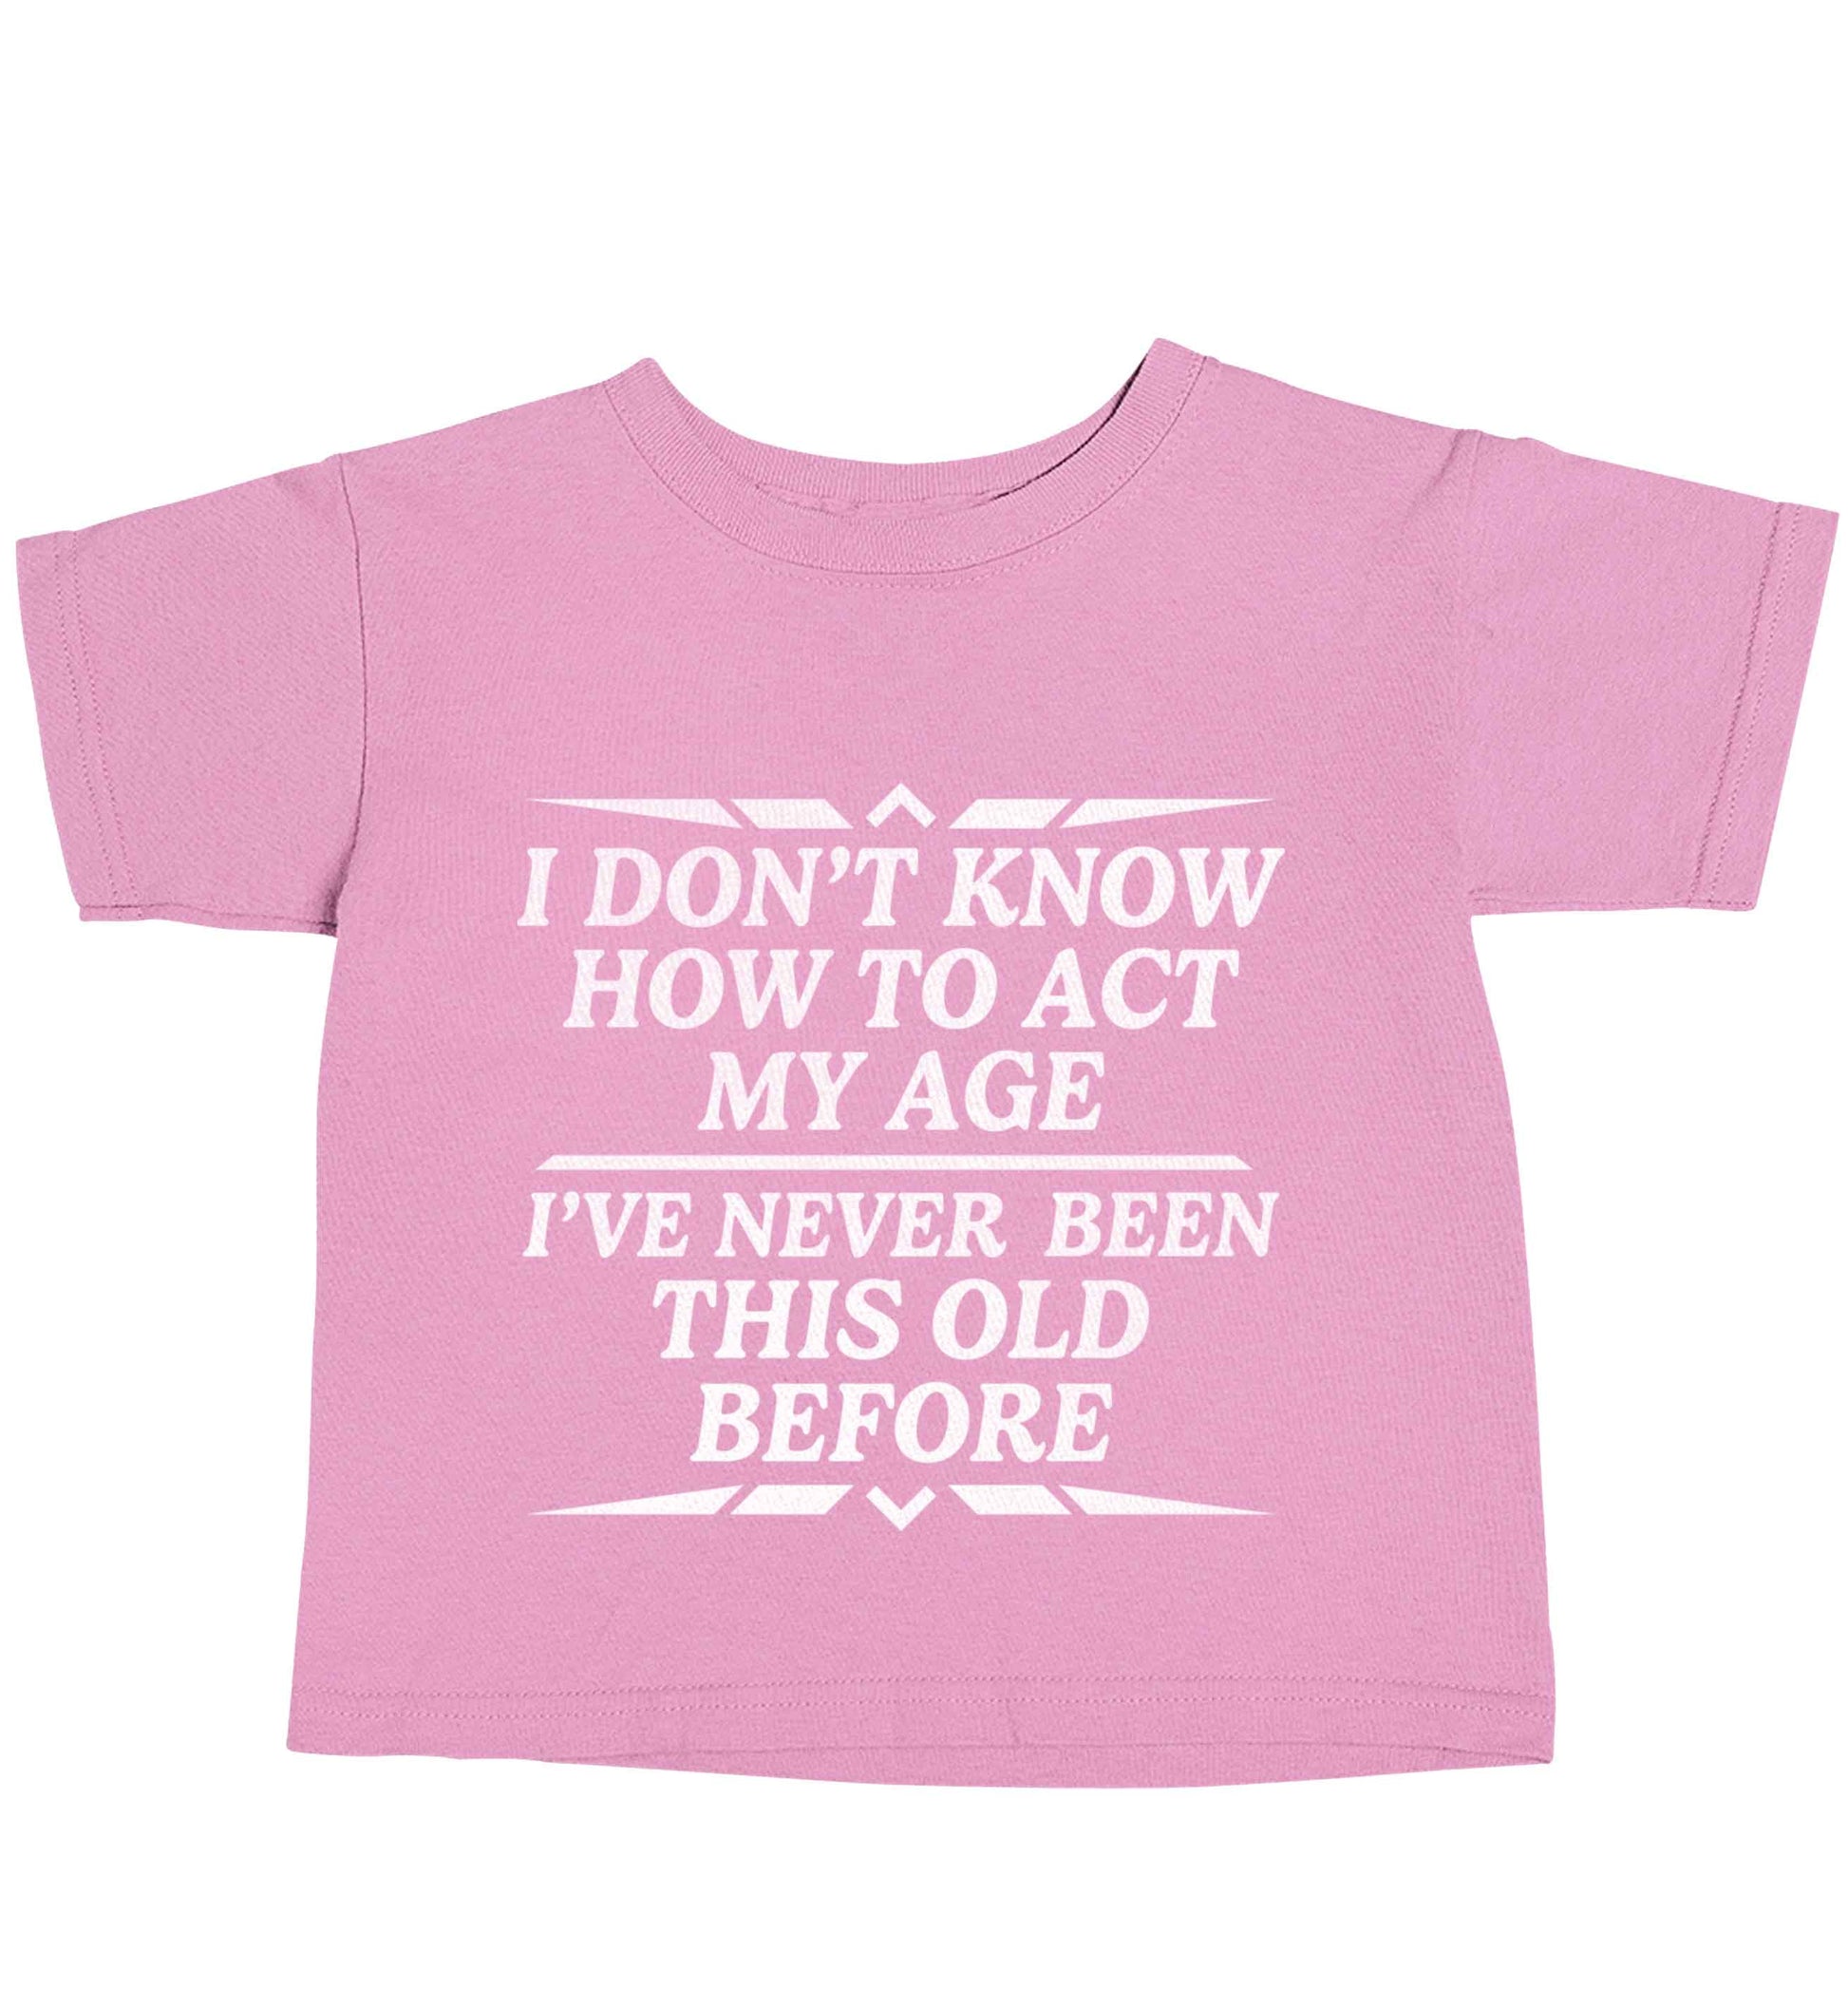 I don't know how to act my age I've never been this old before light pink baby toddler Tshirt 2 Years